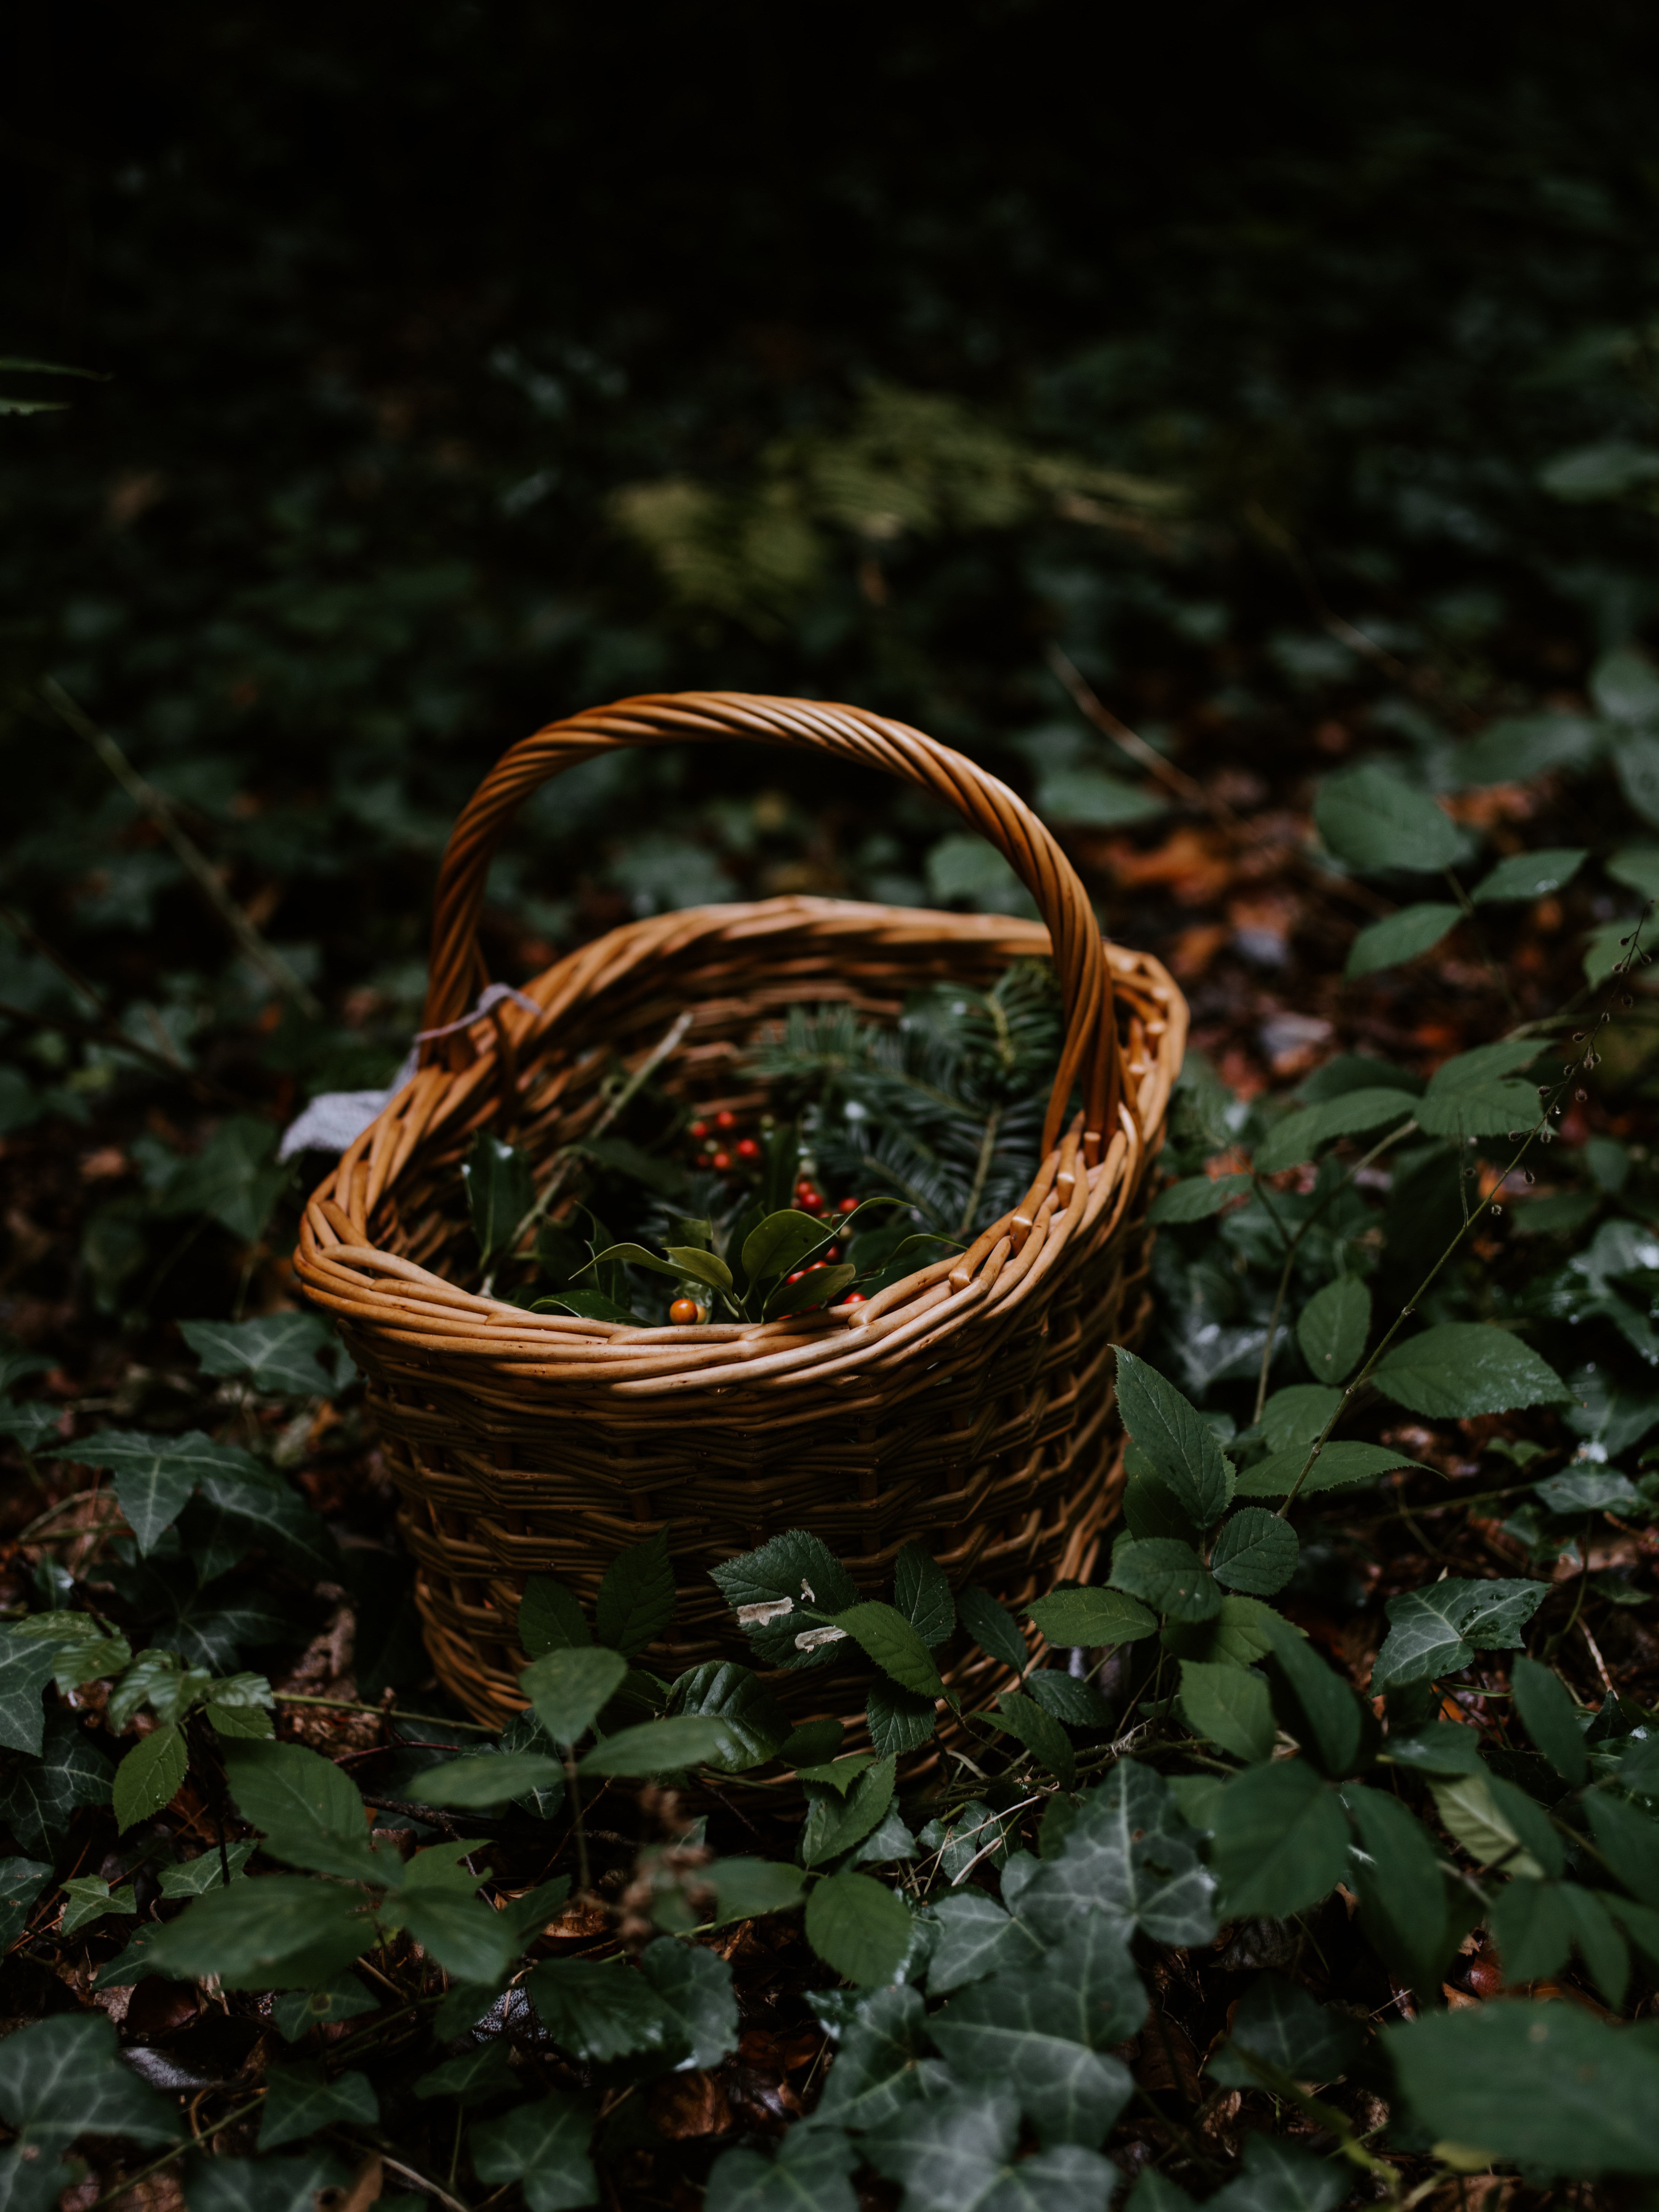 miscellaneous, nature, berries, miscellanea, branches, basket, wicker, braided Aesthetic wallpaper